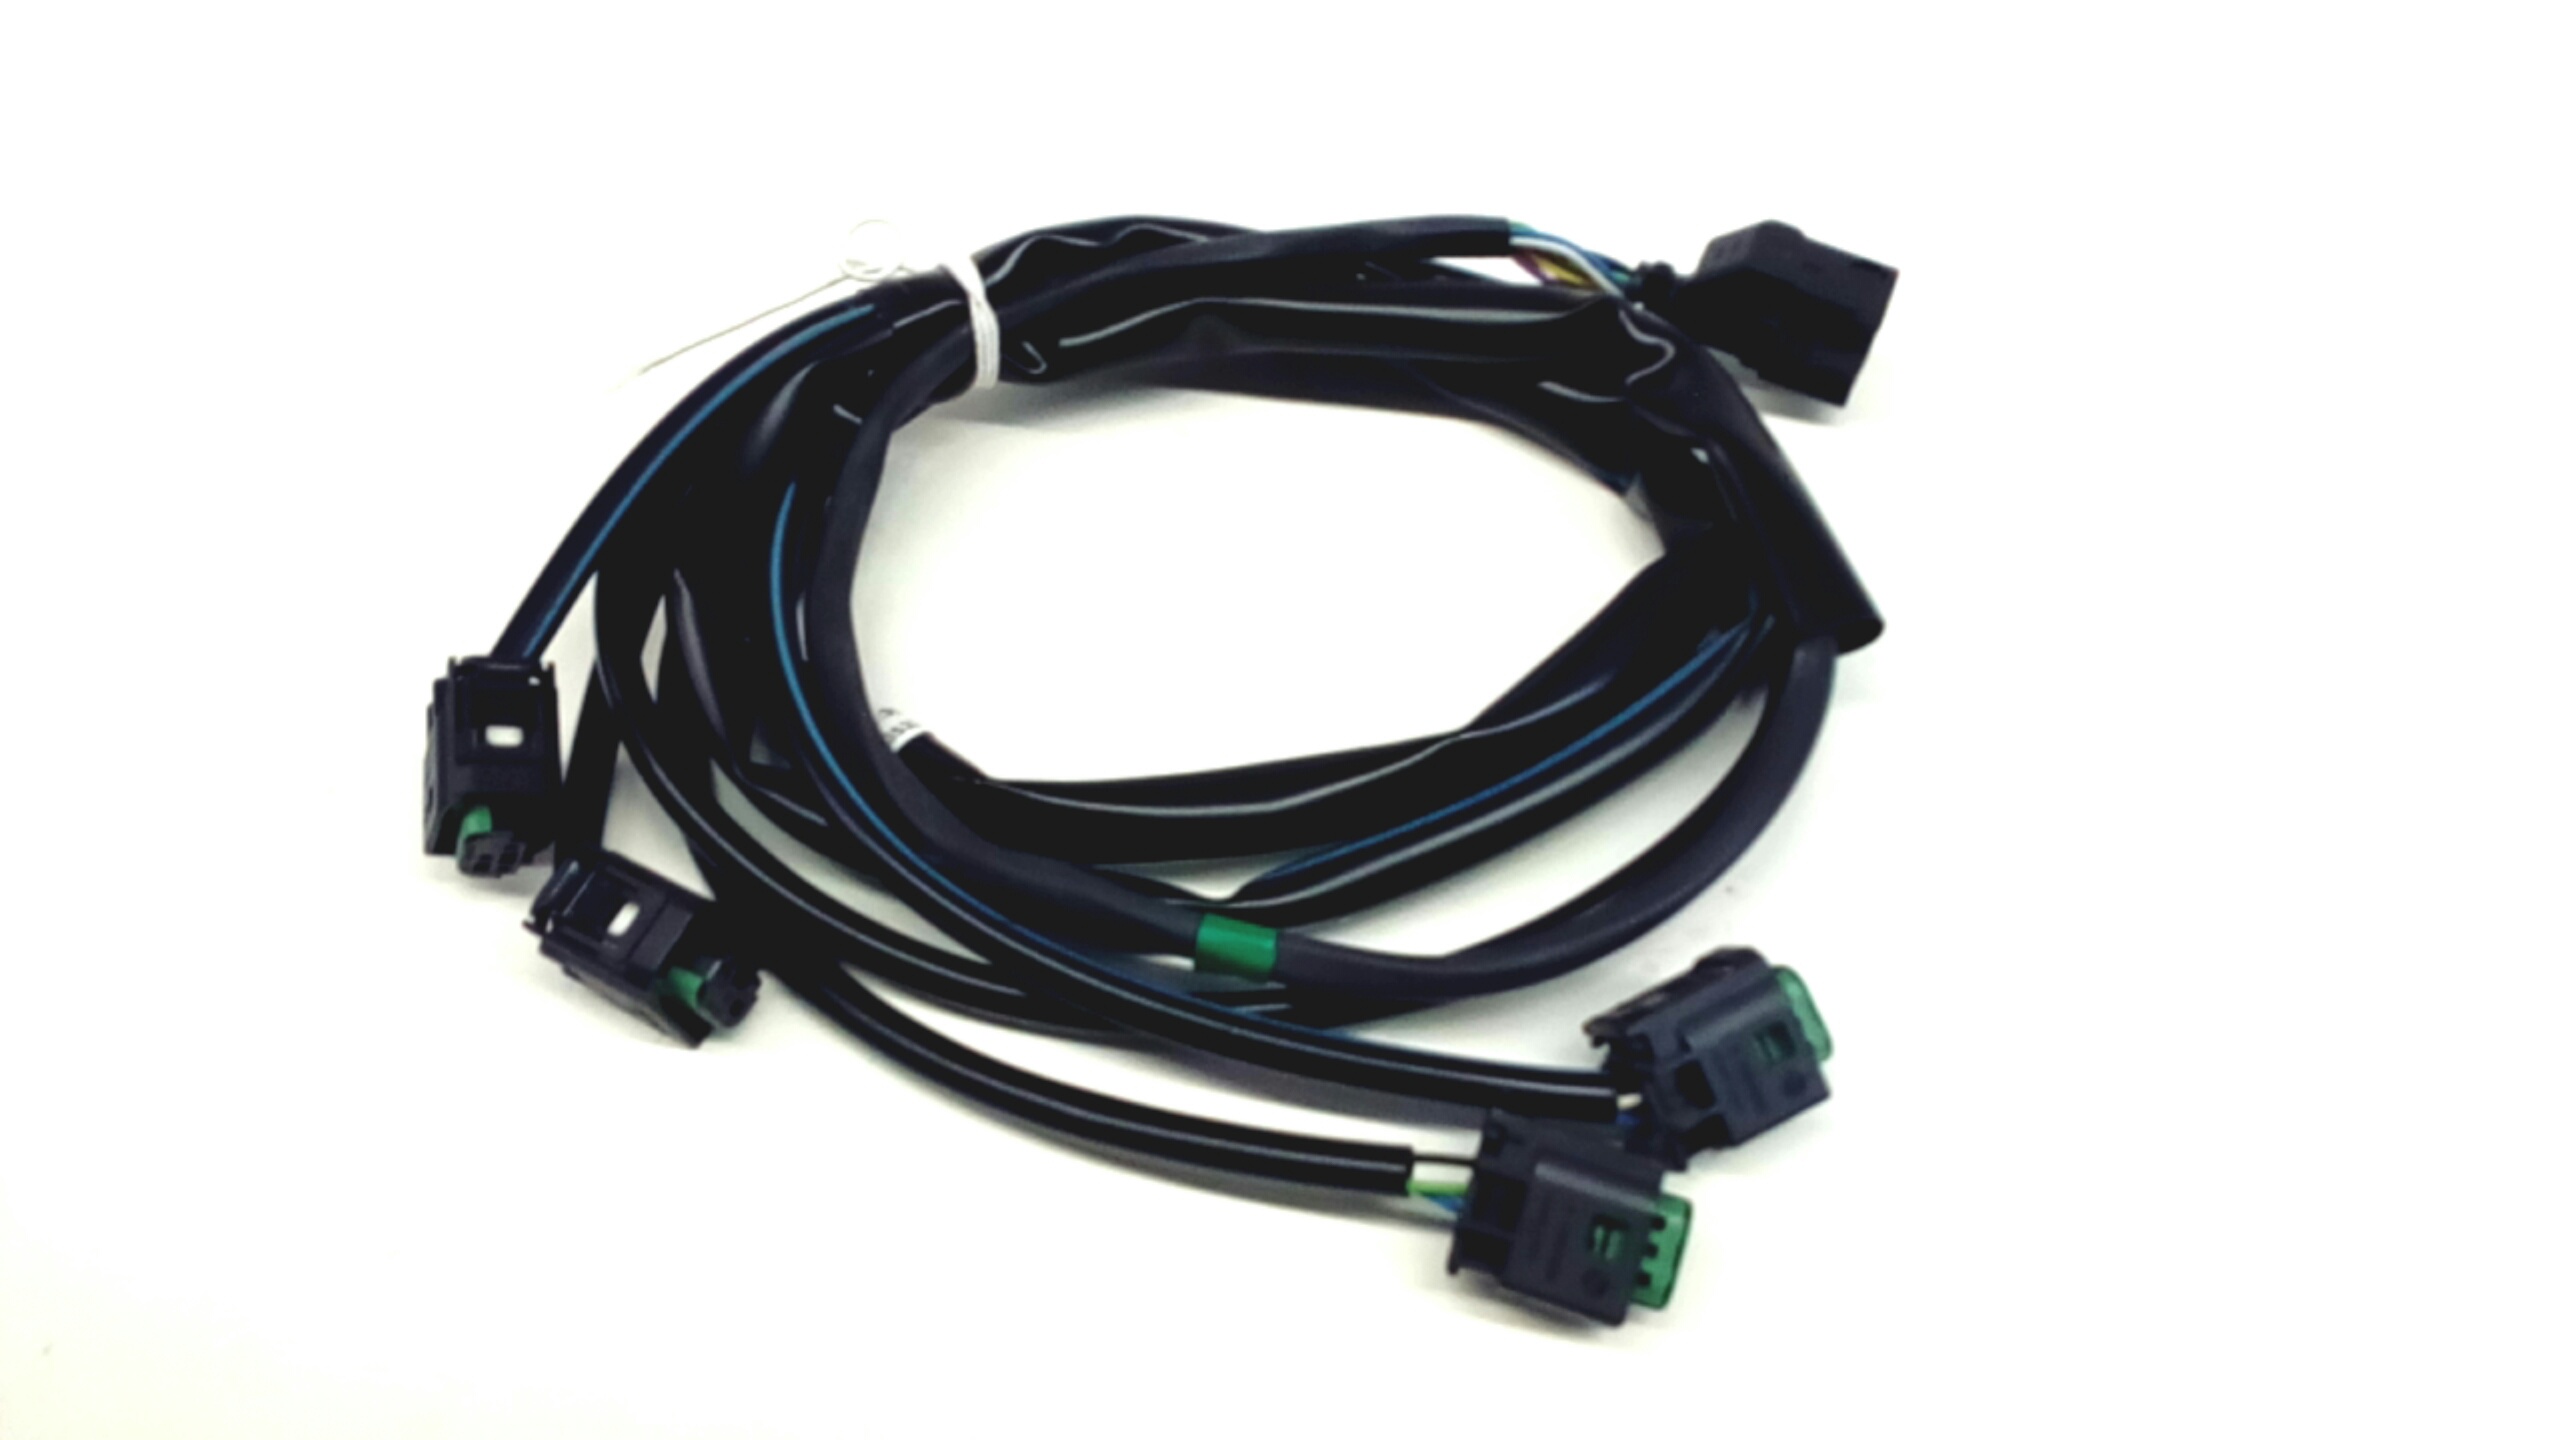 Volvo V70 Wiring Harness. Park Assist. (Rear). System, Electrical ...